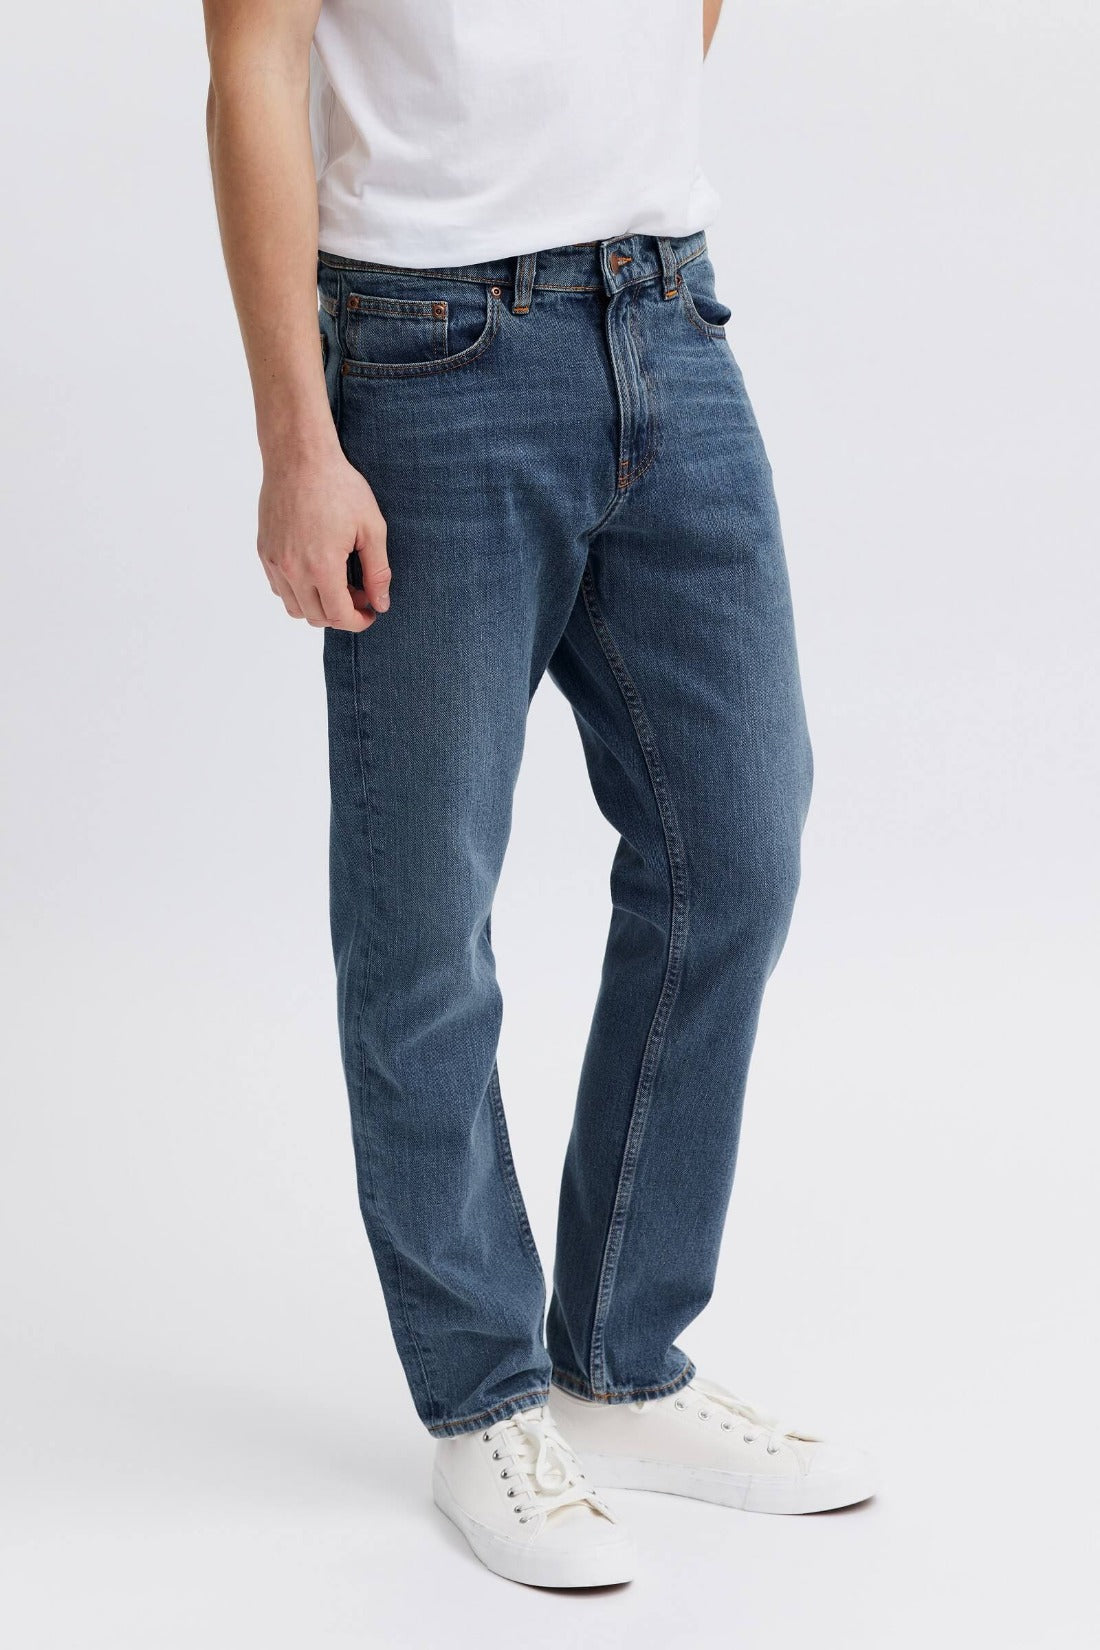 Lease Jeans